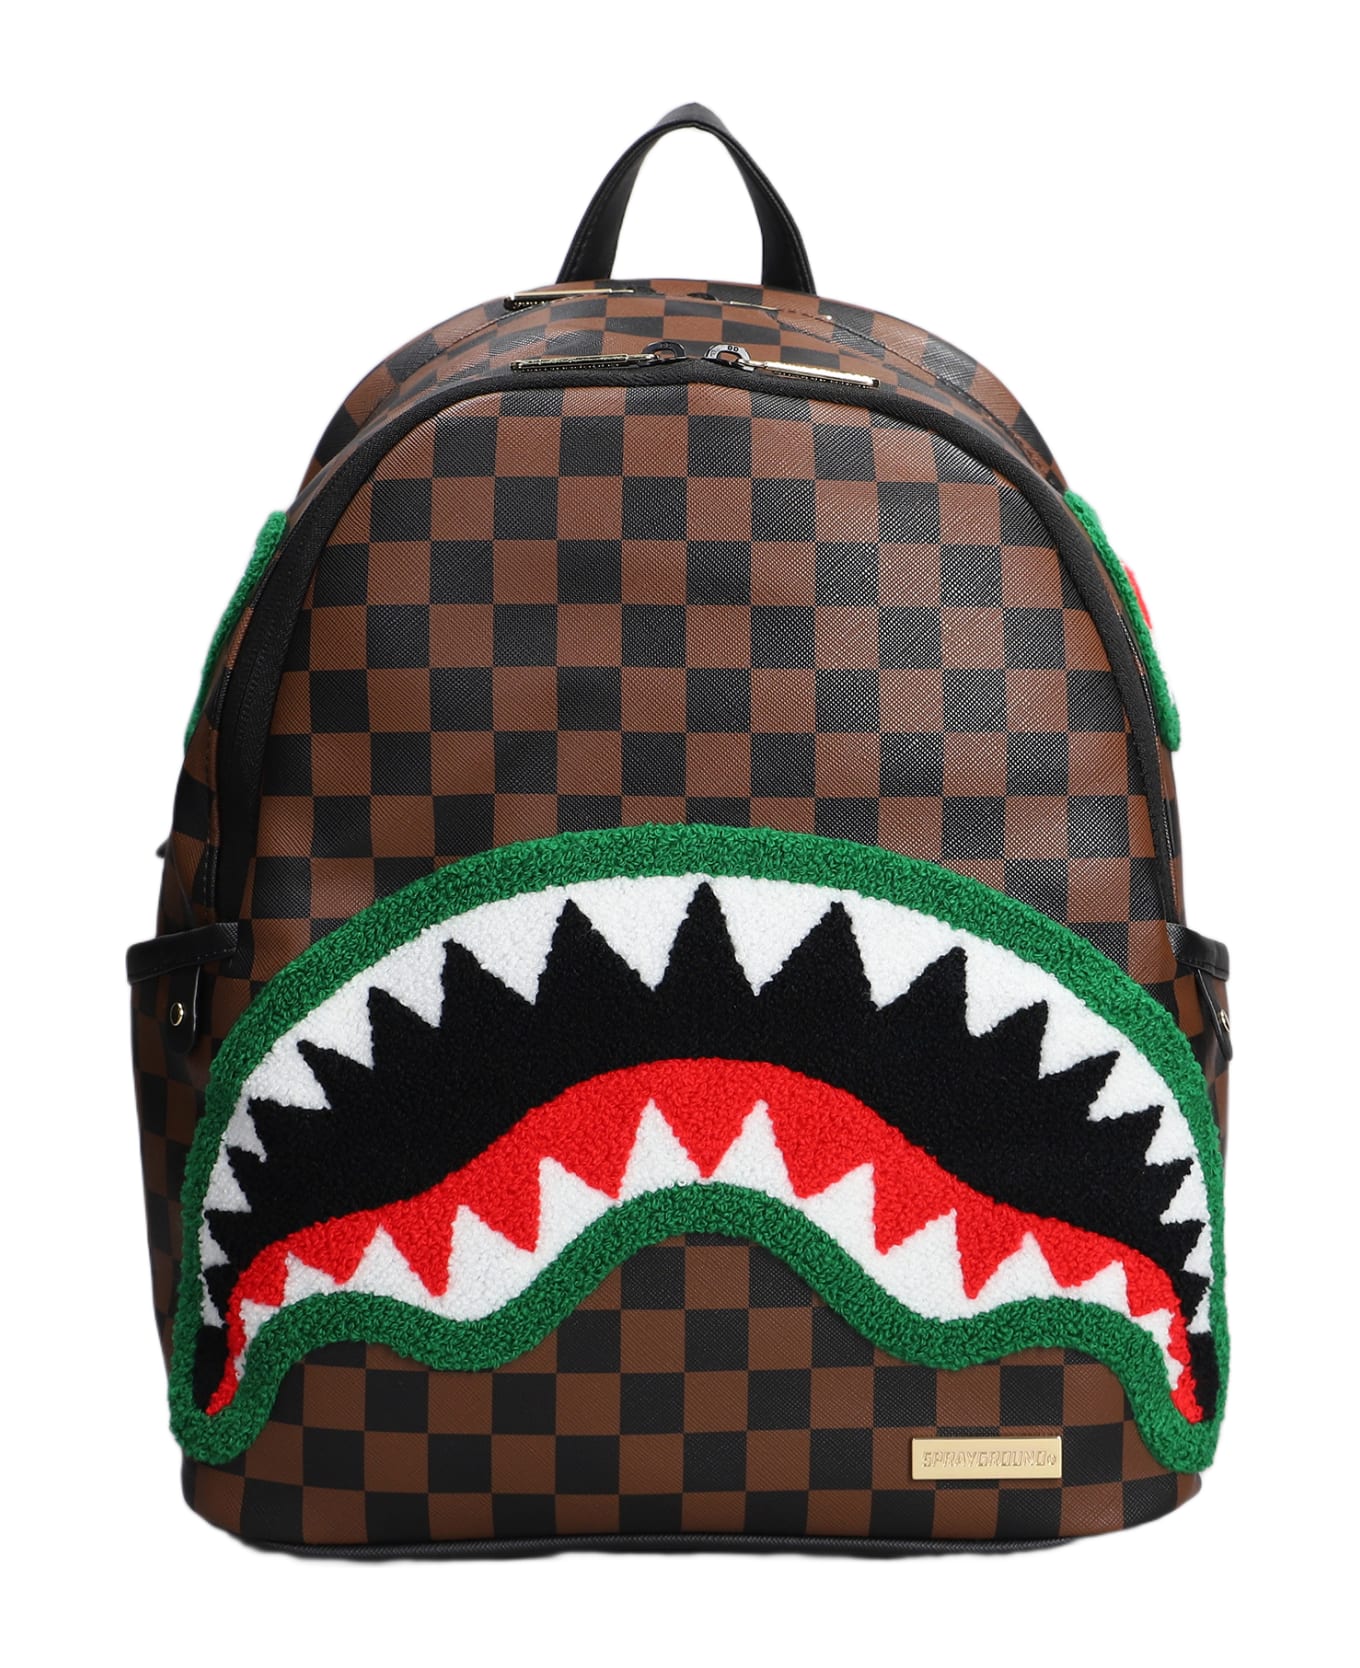 Sprayground Backpack In Brown Pvc バックパック